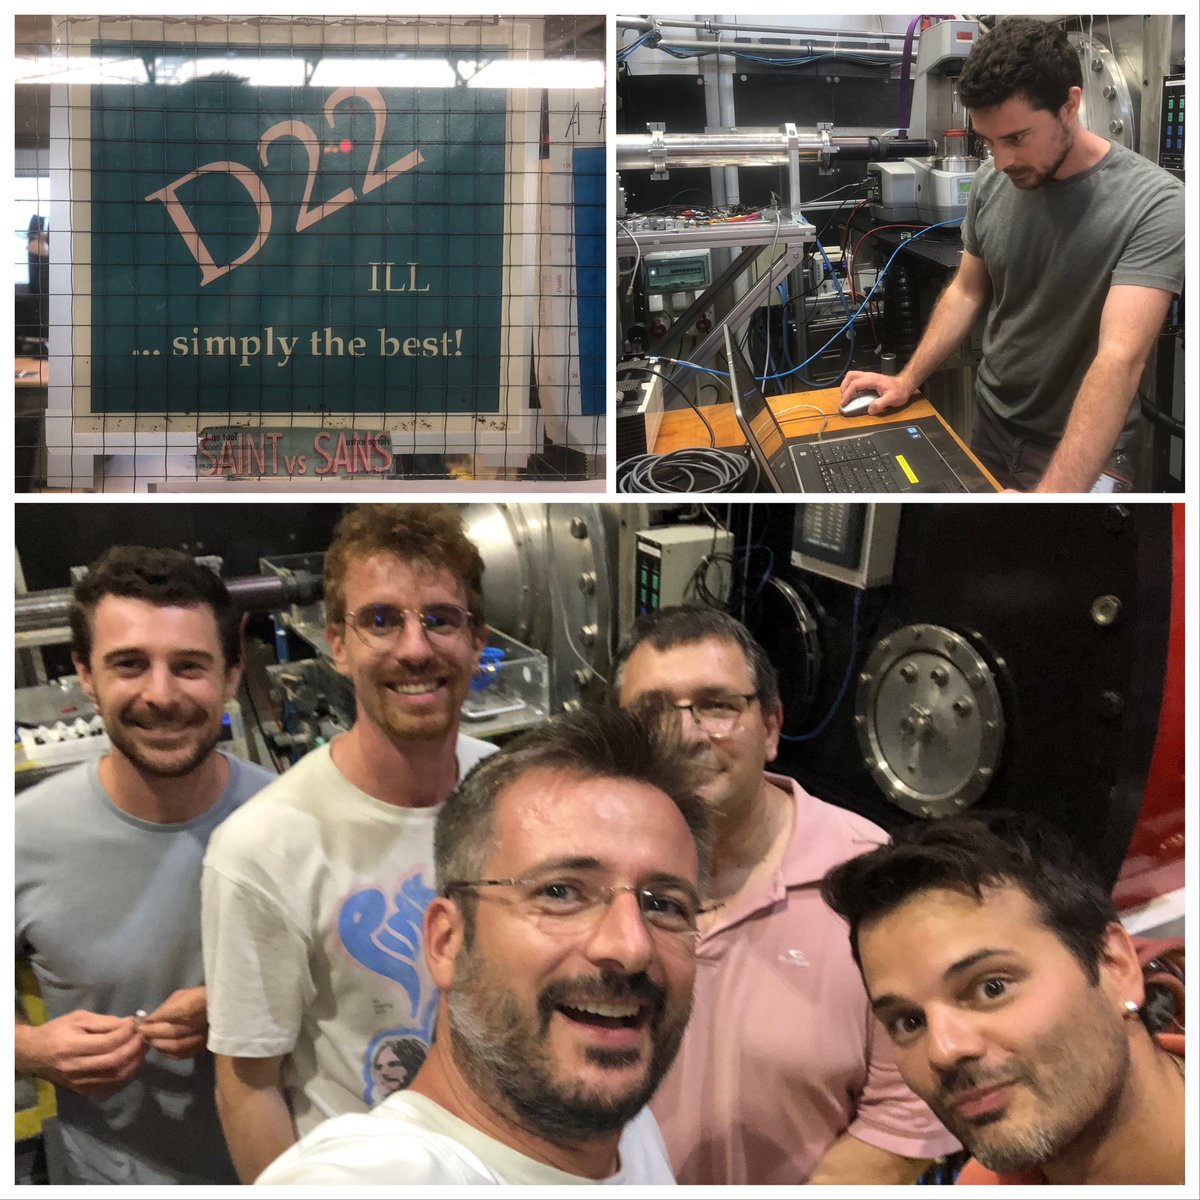 Enjoying an exciting & productive scientific weekend of Rheo-#SANS on #cellulose based #gels @ILLGrenoble on D22 hosted by the wonderful Lionel Porcar! Stay tuned for the results! 😎#rheology #neutron #neutronscattering #everythingflows cc @INP_CNRS @INC_CNRS